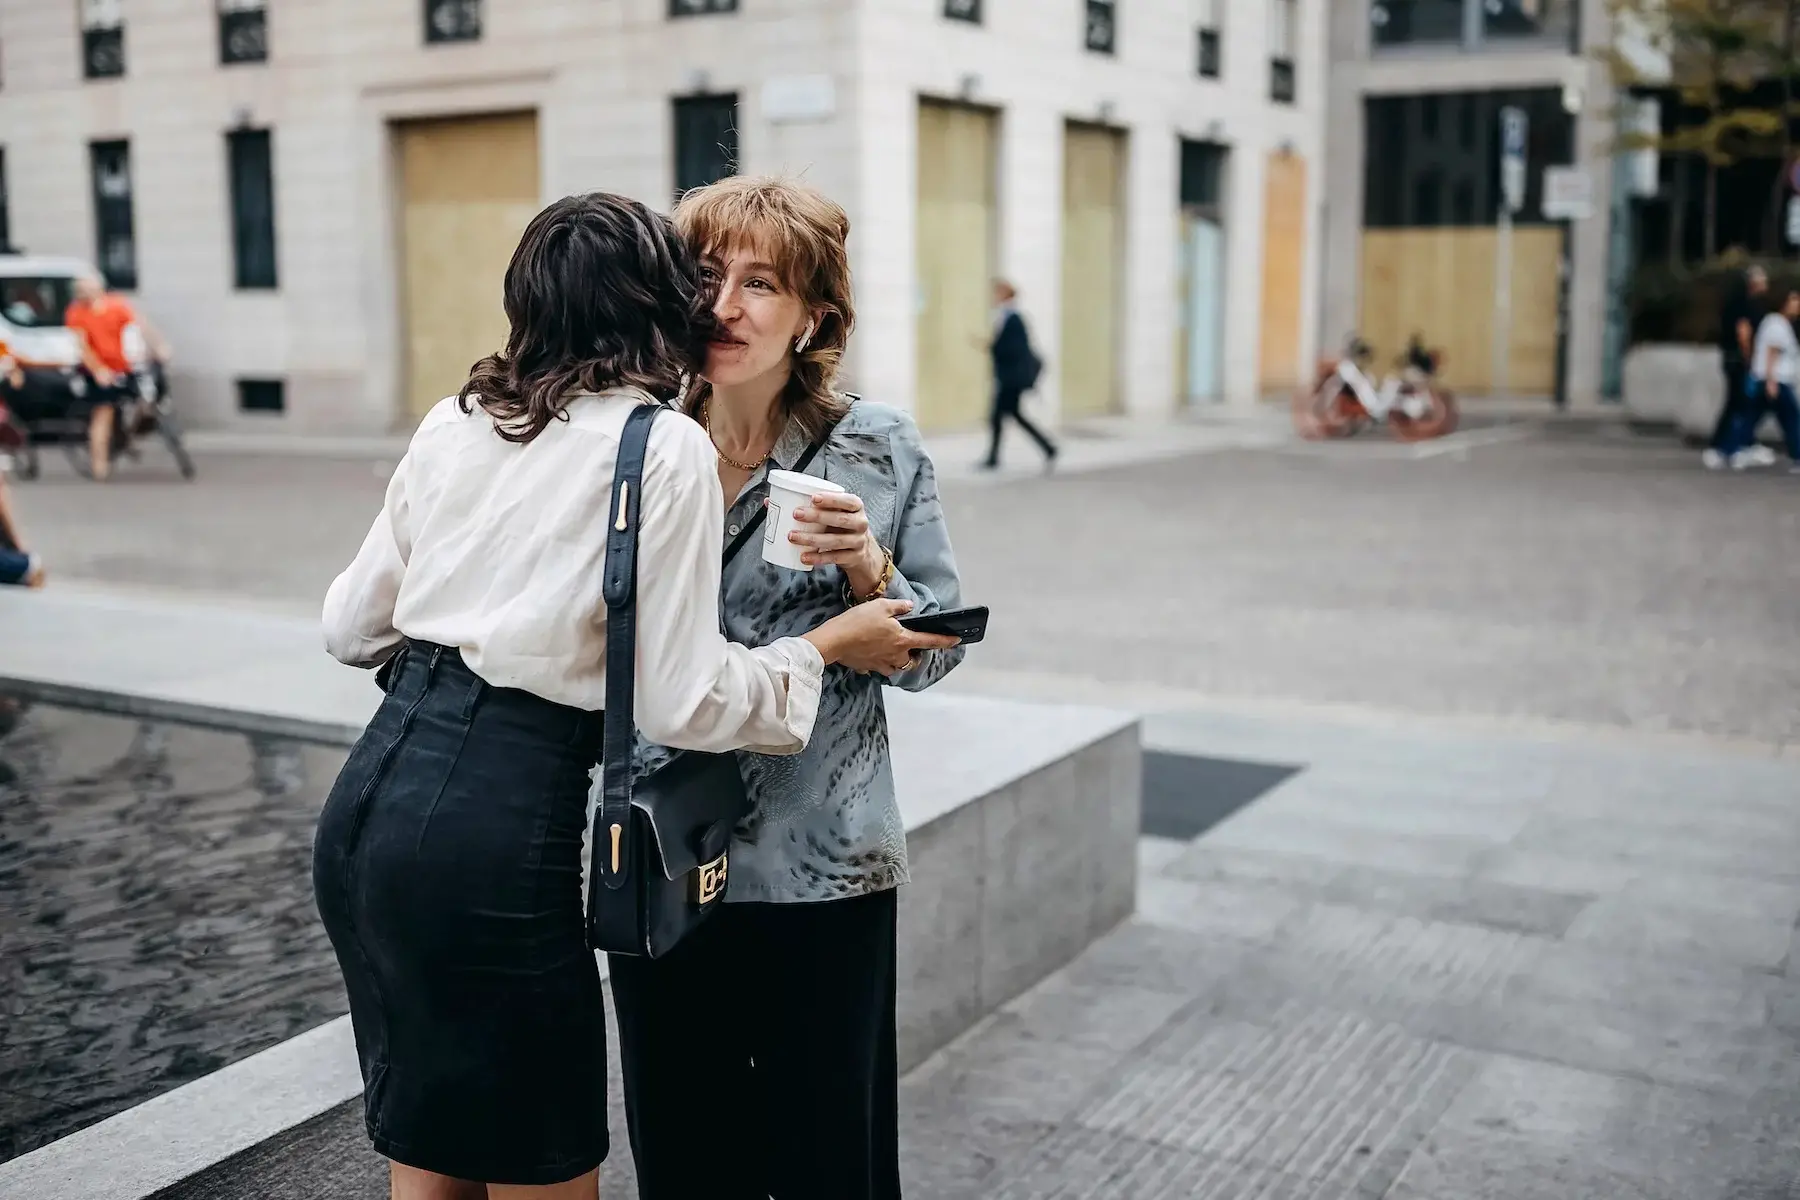 Two well-dressed businesswomen meet on the city street, first kissing each other's cheek